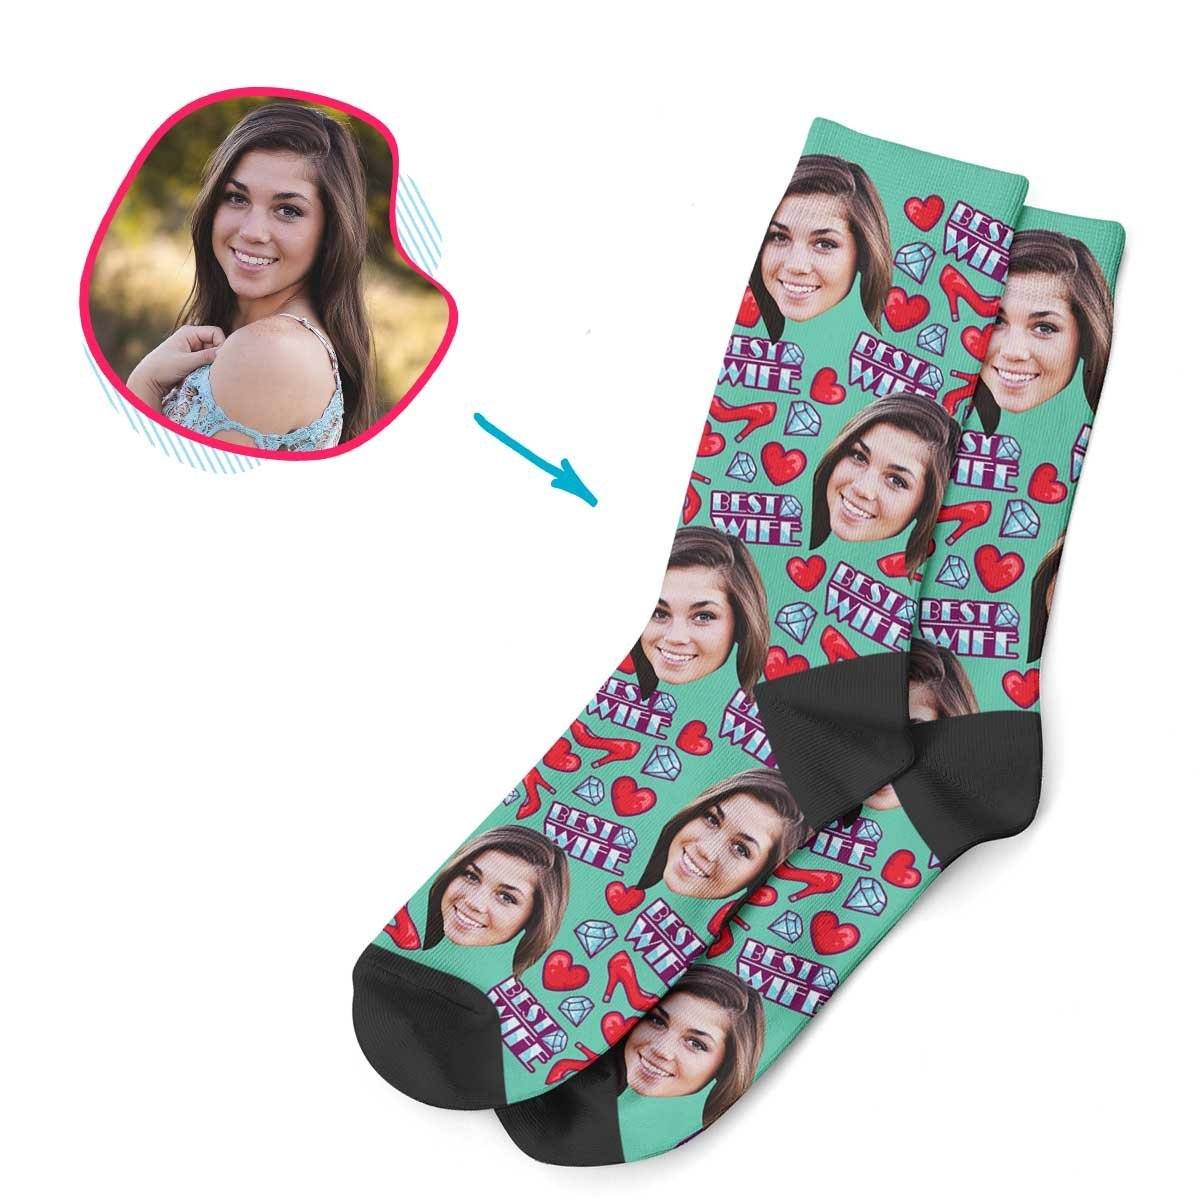 Mint Wife personalized socks with photo of face printed on them